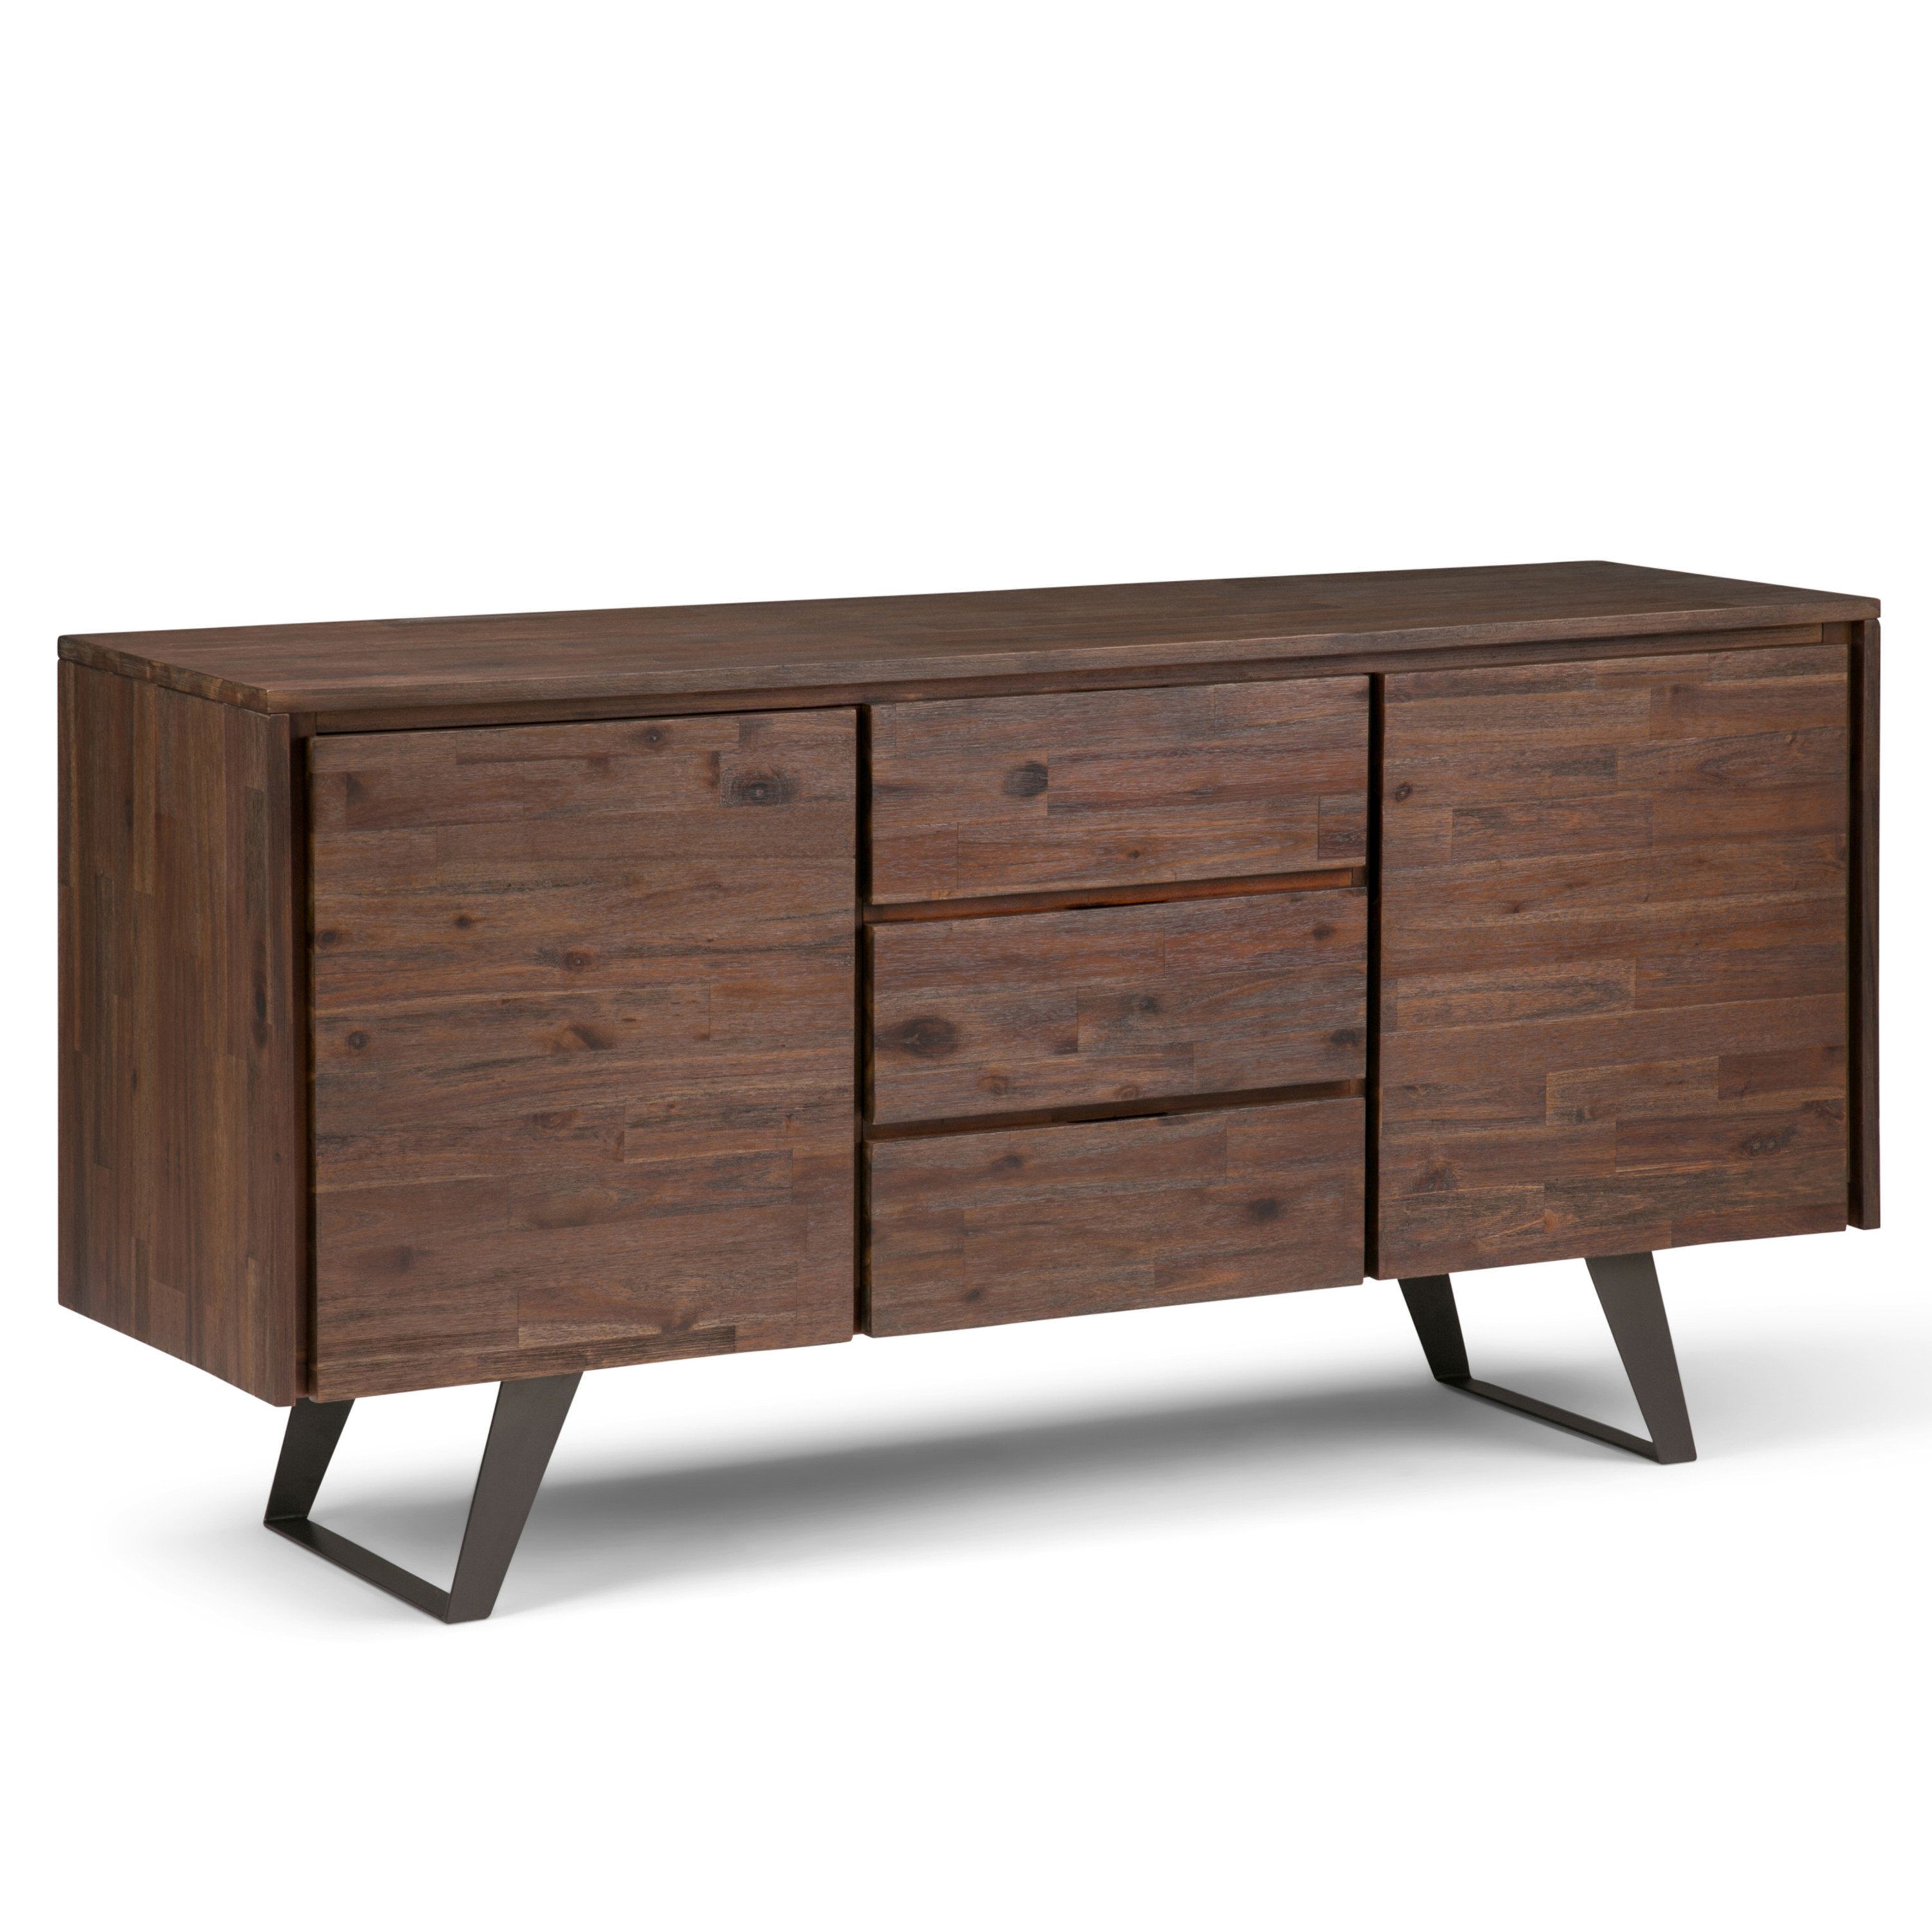 Modern Solid Wood Sideboards + Buffets | Allmodern With Regard To Current Adkins Sideboards (View 12 of 20)